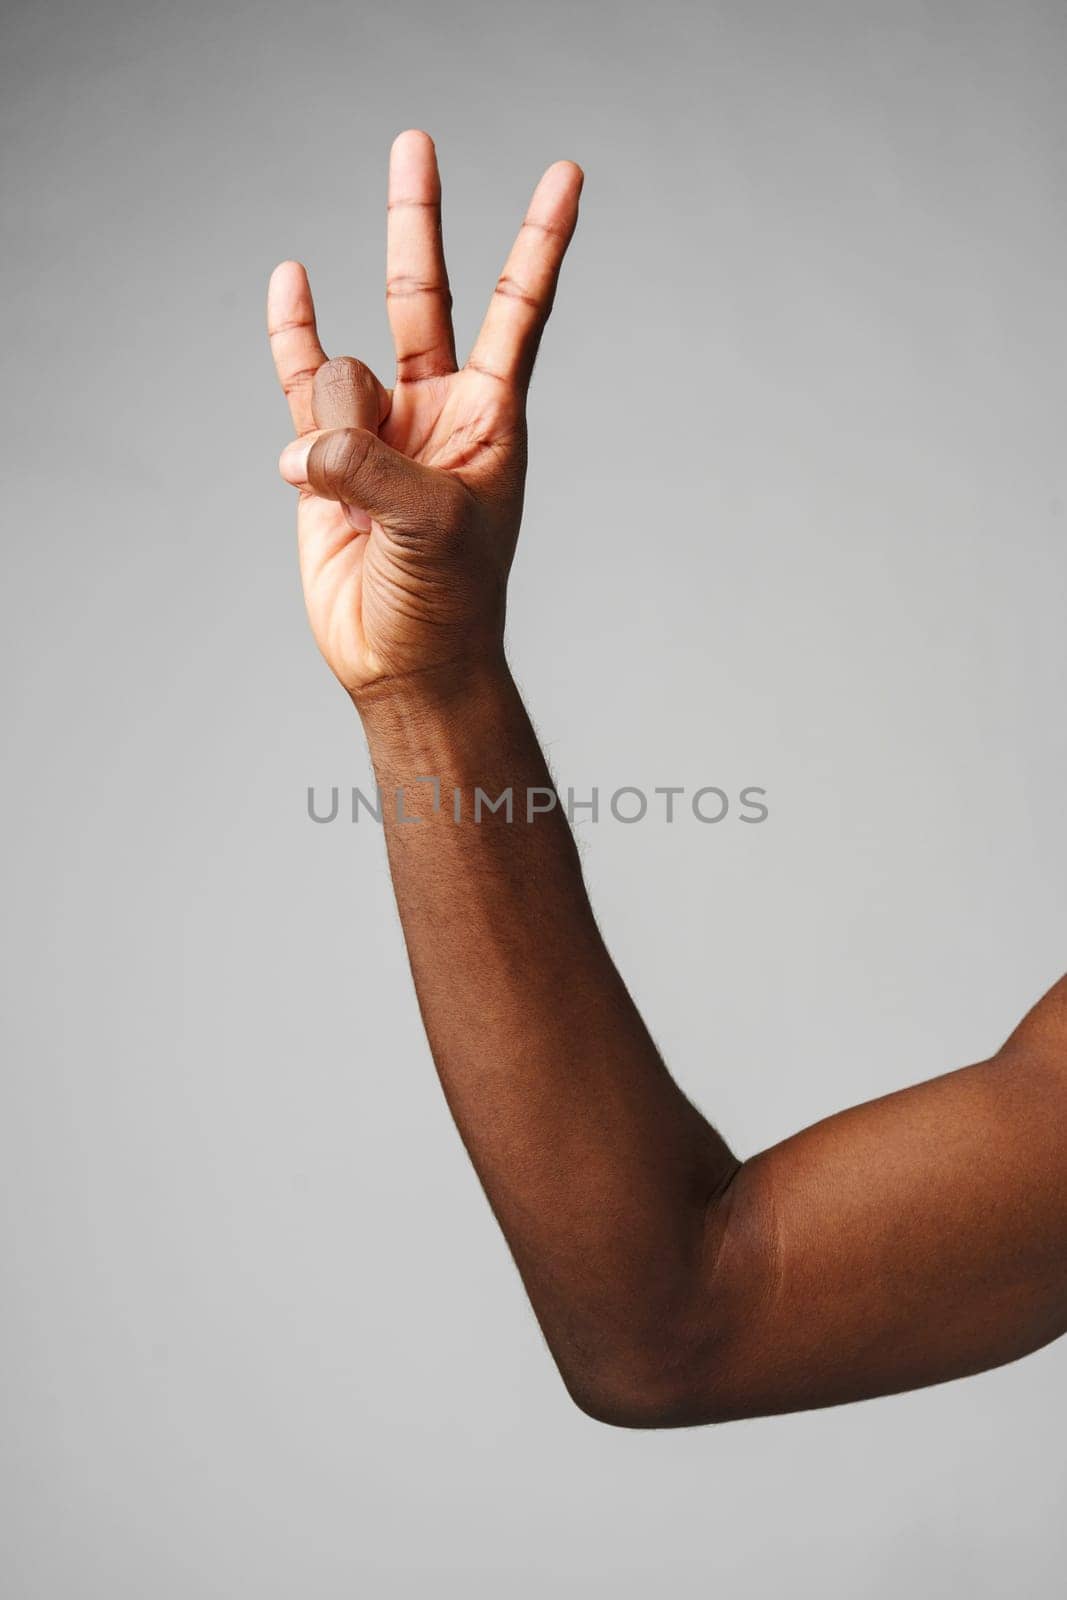 A mans arm is extended, with his hand forming a peace sign gesture.